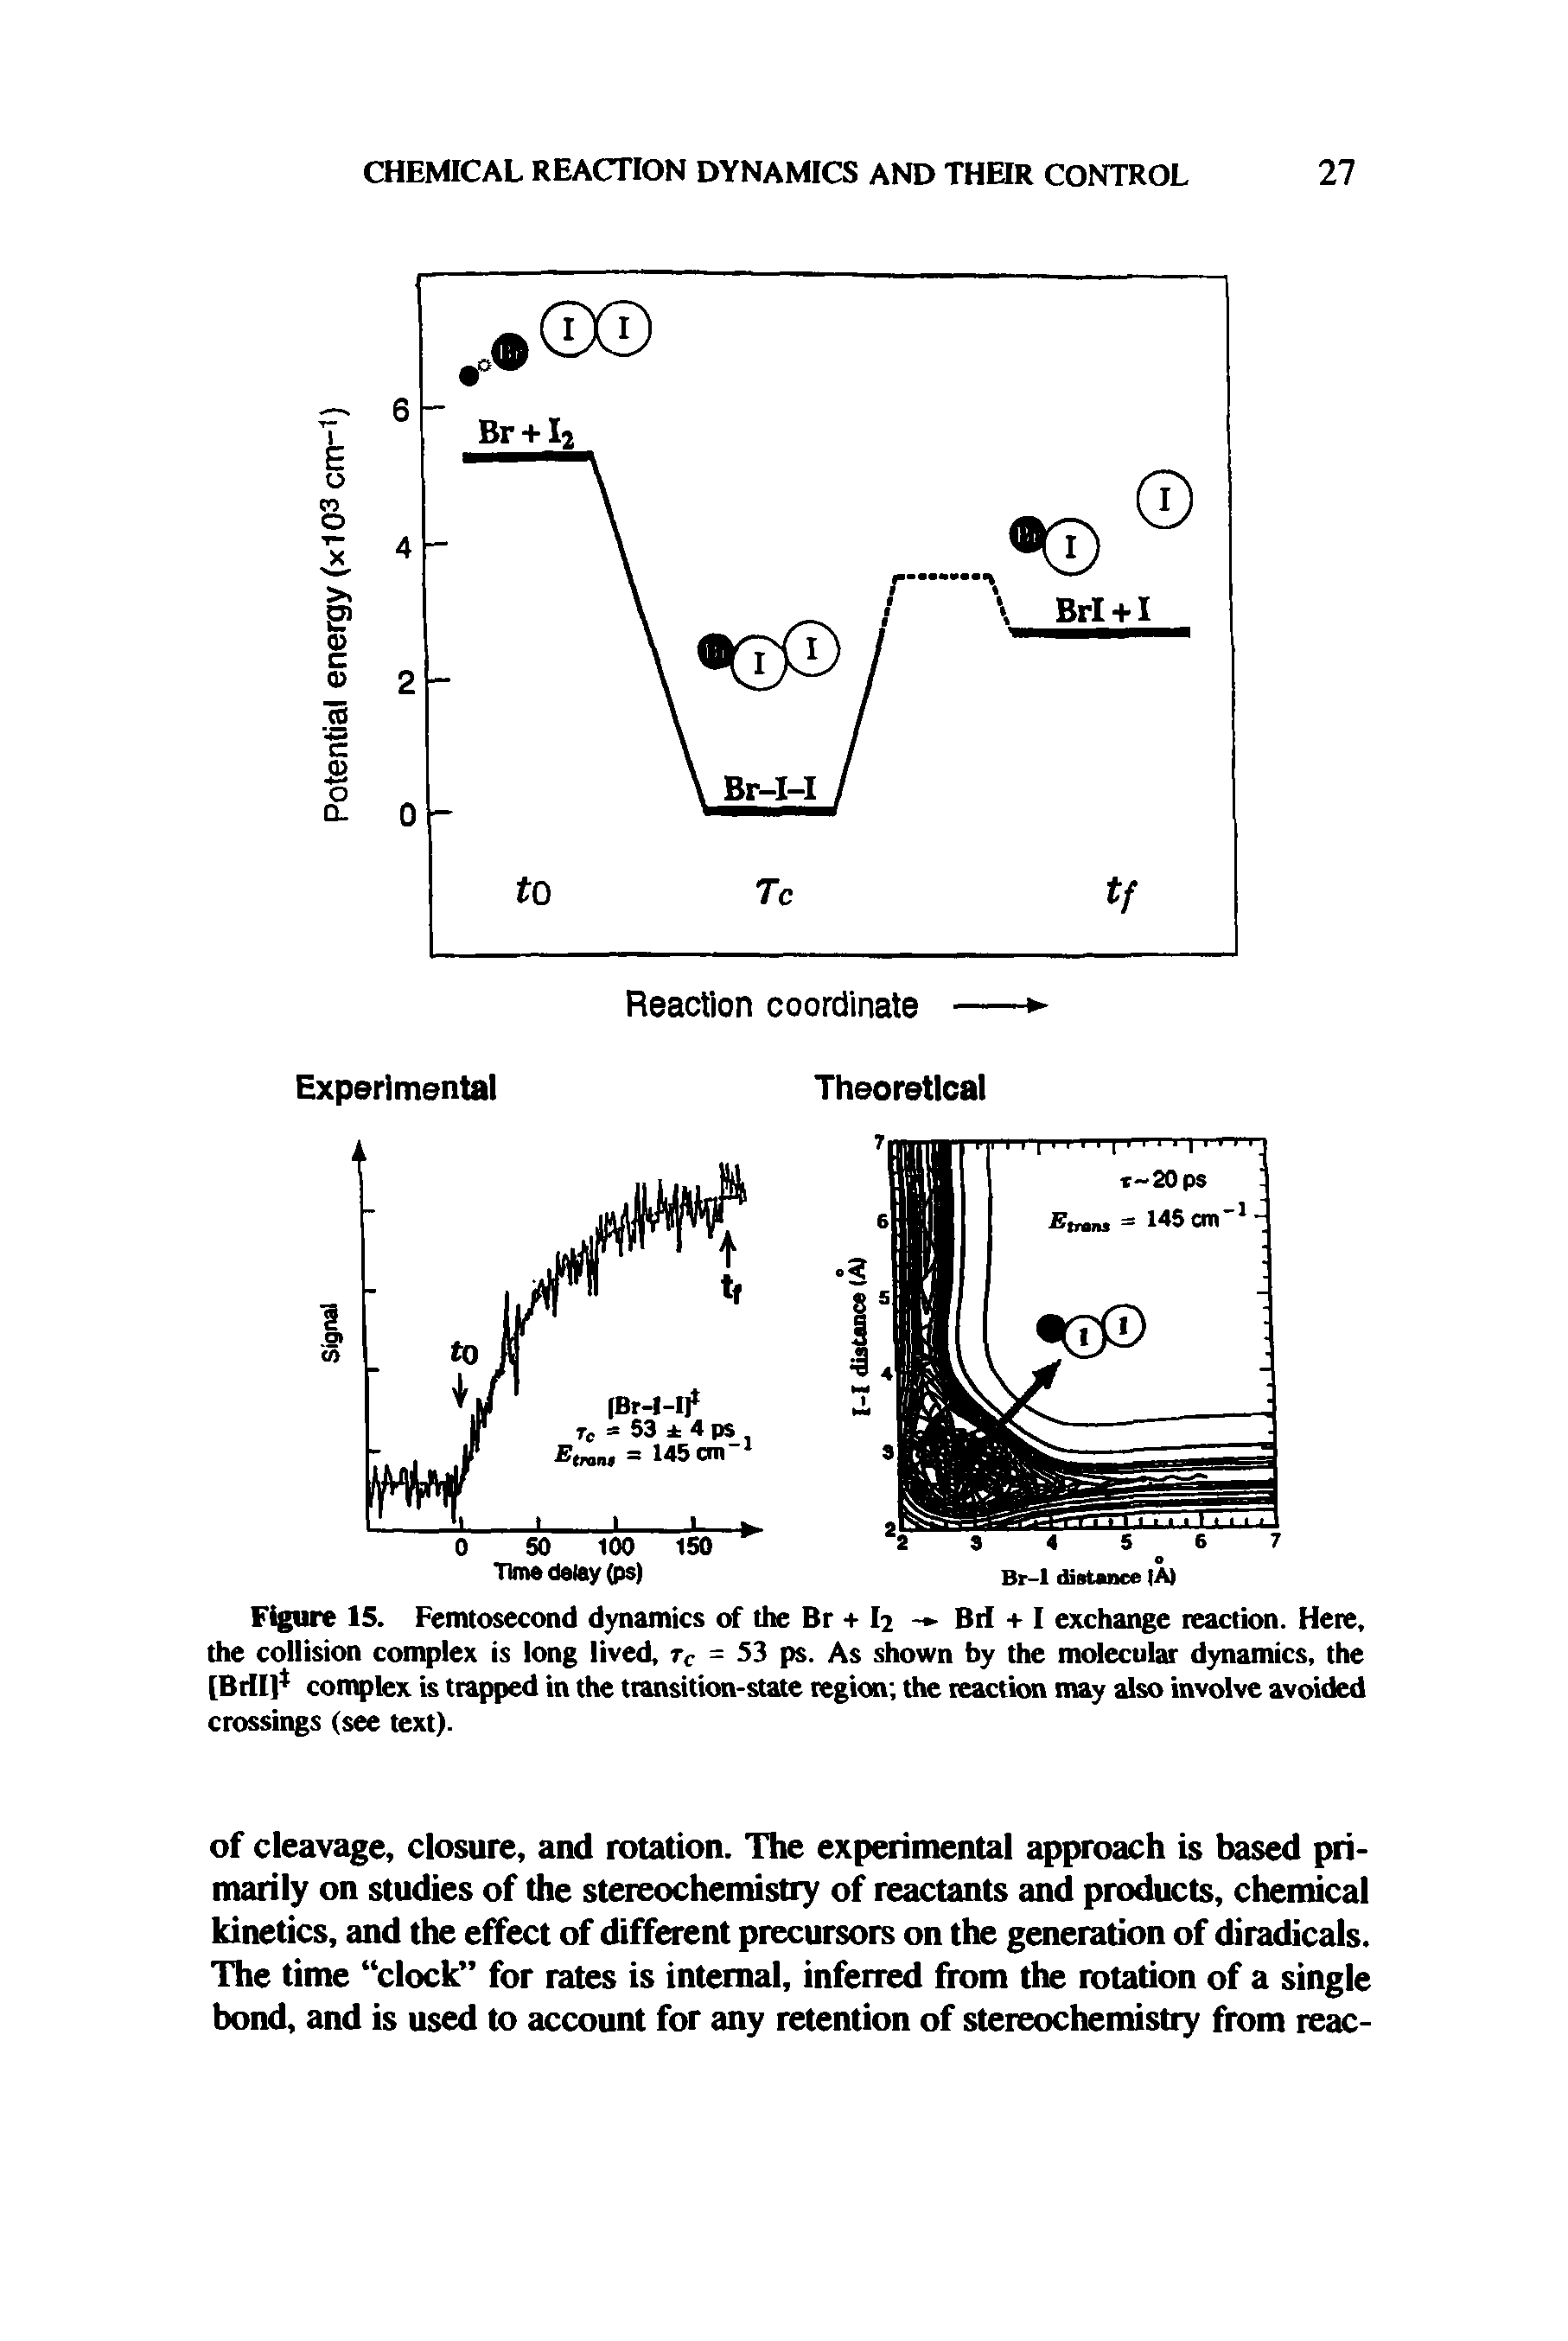 Figure 15. Femtosecond dynamics of the Br + I2 - Brf + I exchange reaction. Here, the collision complex is long lived, tc = 53 ps. As shown by the molecular dynamics, the [Brill complex is trapped in the transition-state region the reaction may also involve avoided crossings (see text).